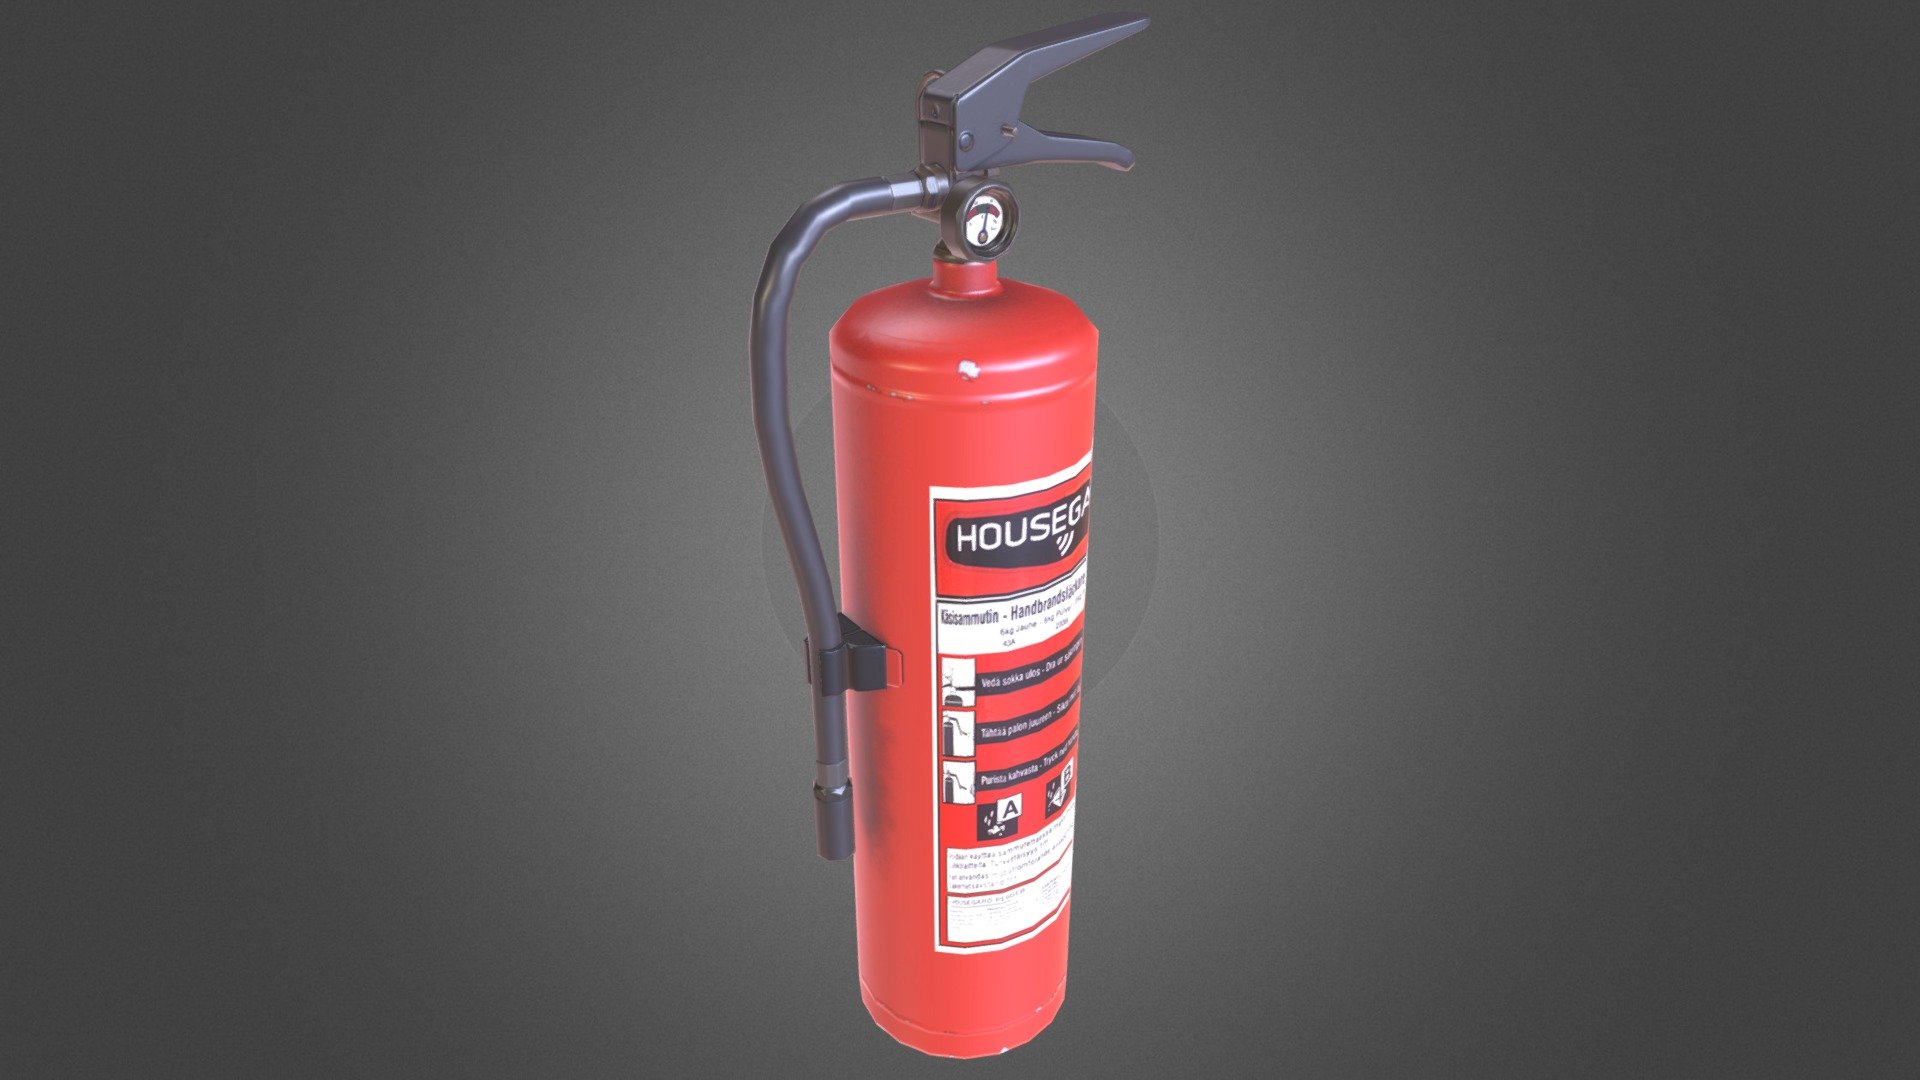 model made to practice maya modelling, hard surface, and materials - fire Extinguisher - 3D model by Hannes Delbeke (@han) 3d model